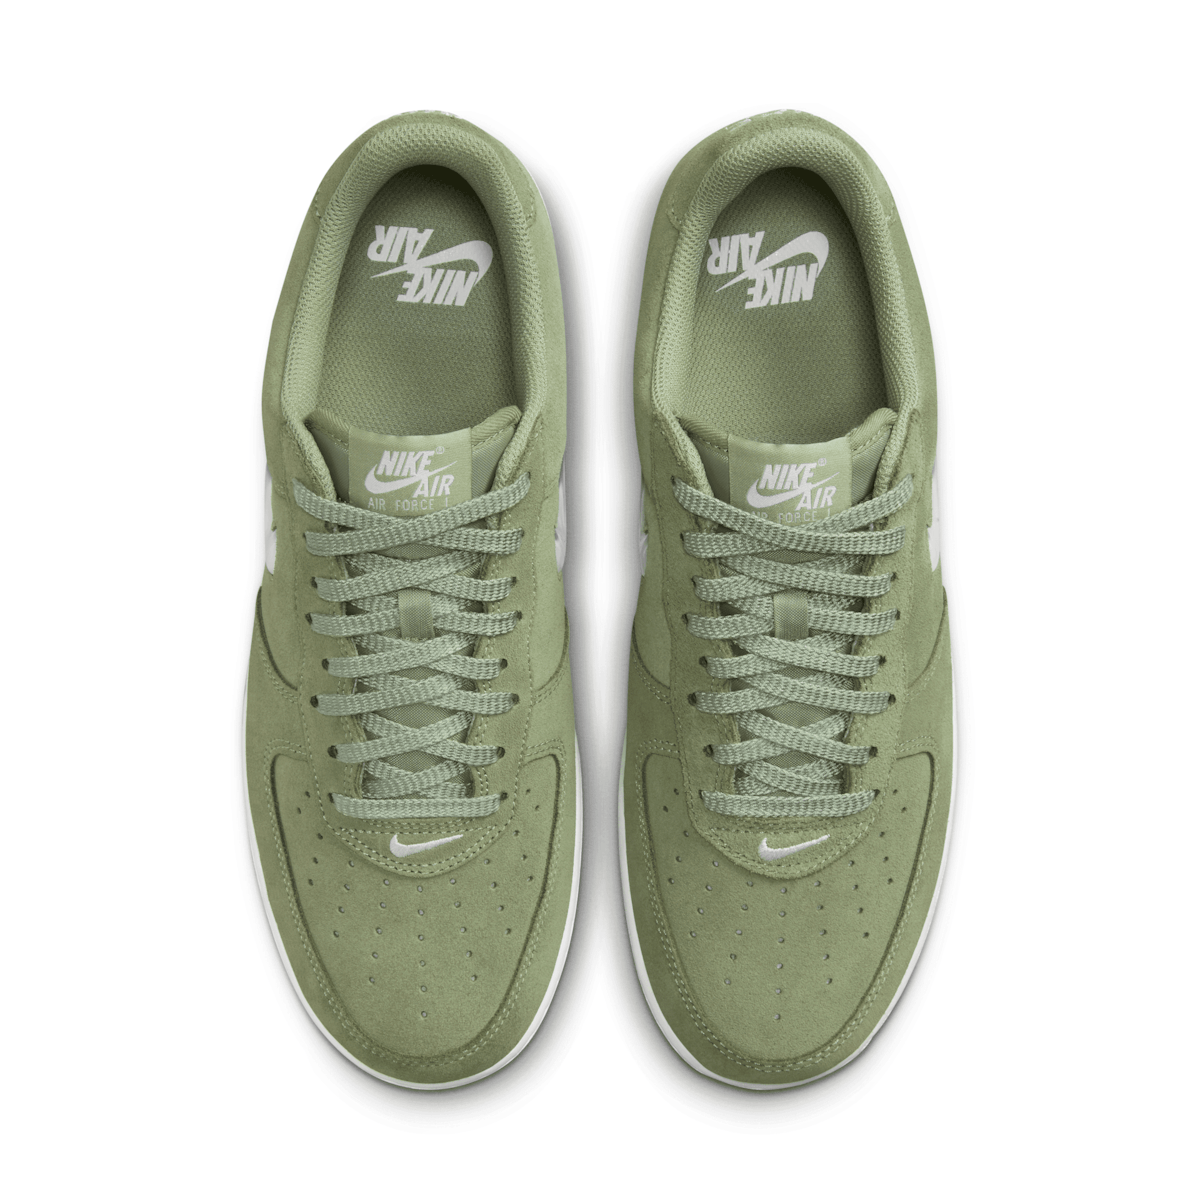 The Nike Air Force 1 'Oil Green' are the shoes to be the most elegant  without giving up color